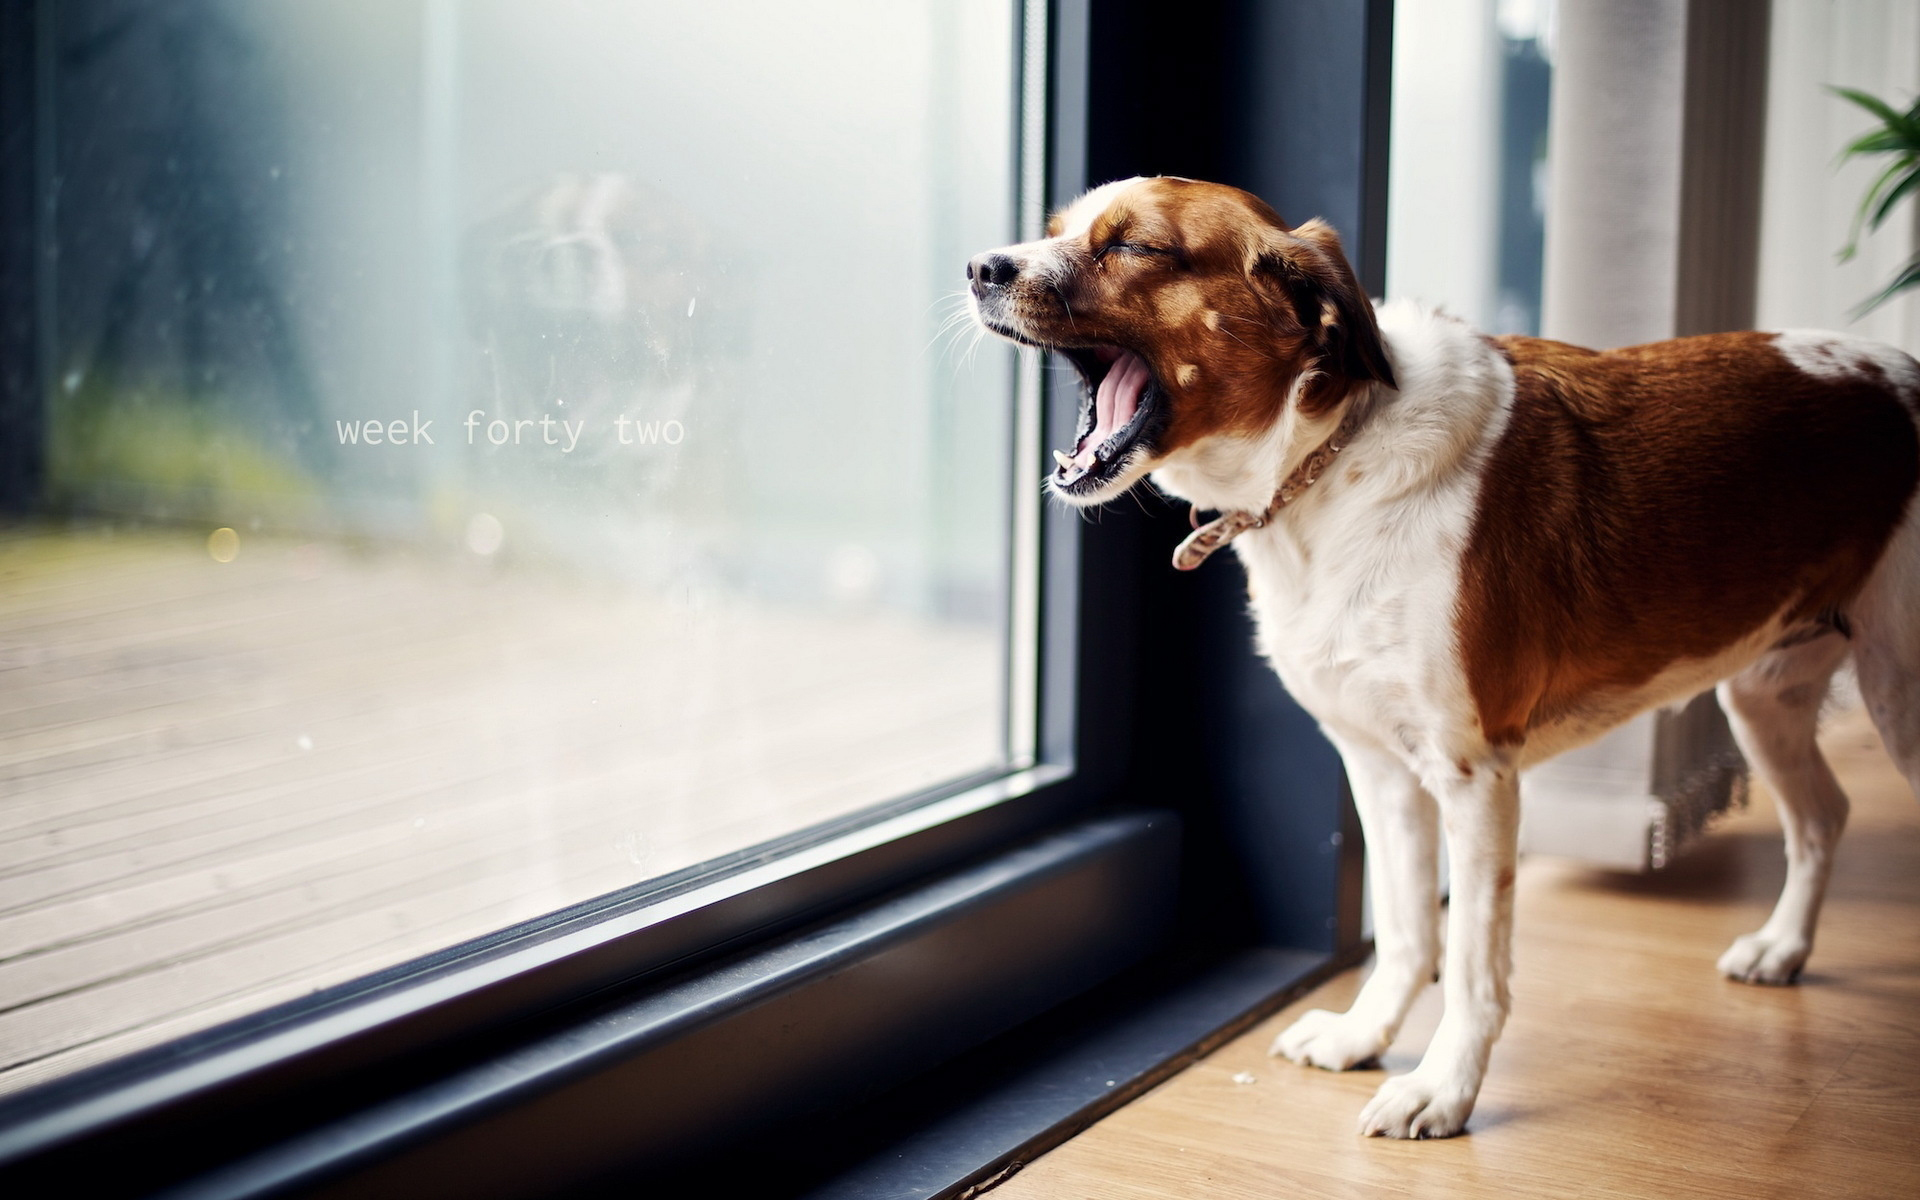 Dog Looking Out The Window Rain - HD Wallpaper 